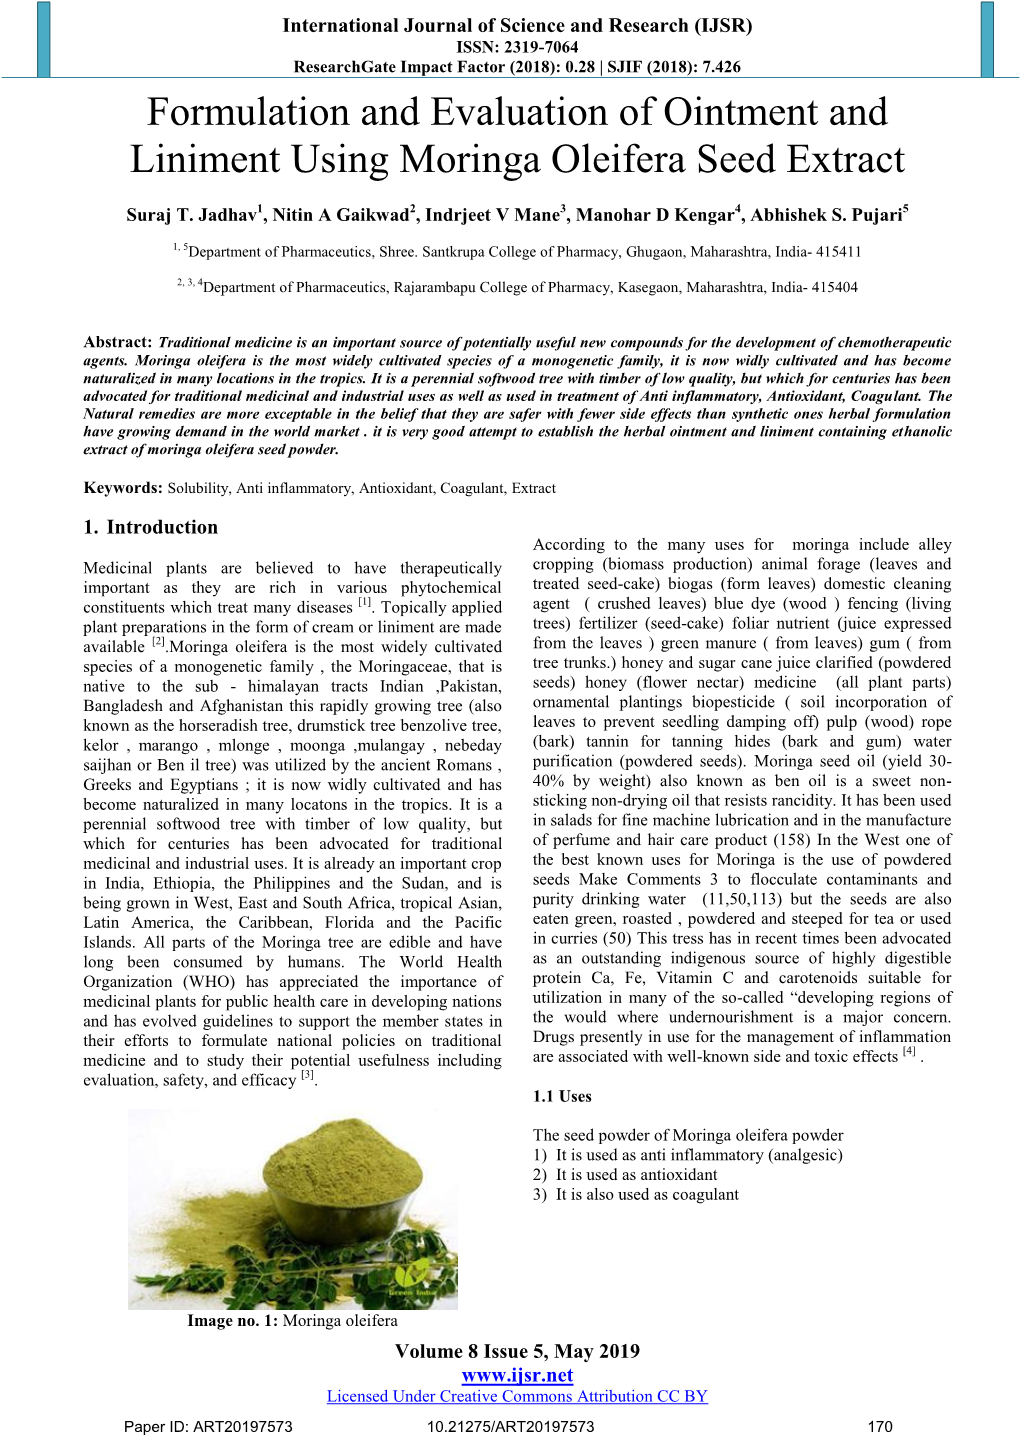 Formulation and Evaluation of Ointment and Liniment Using Moringa Oleifera Seed Extract